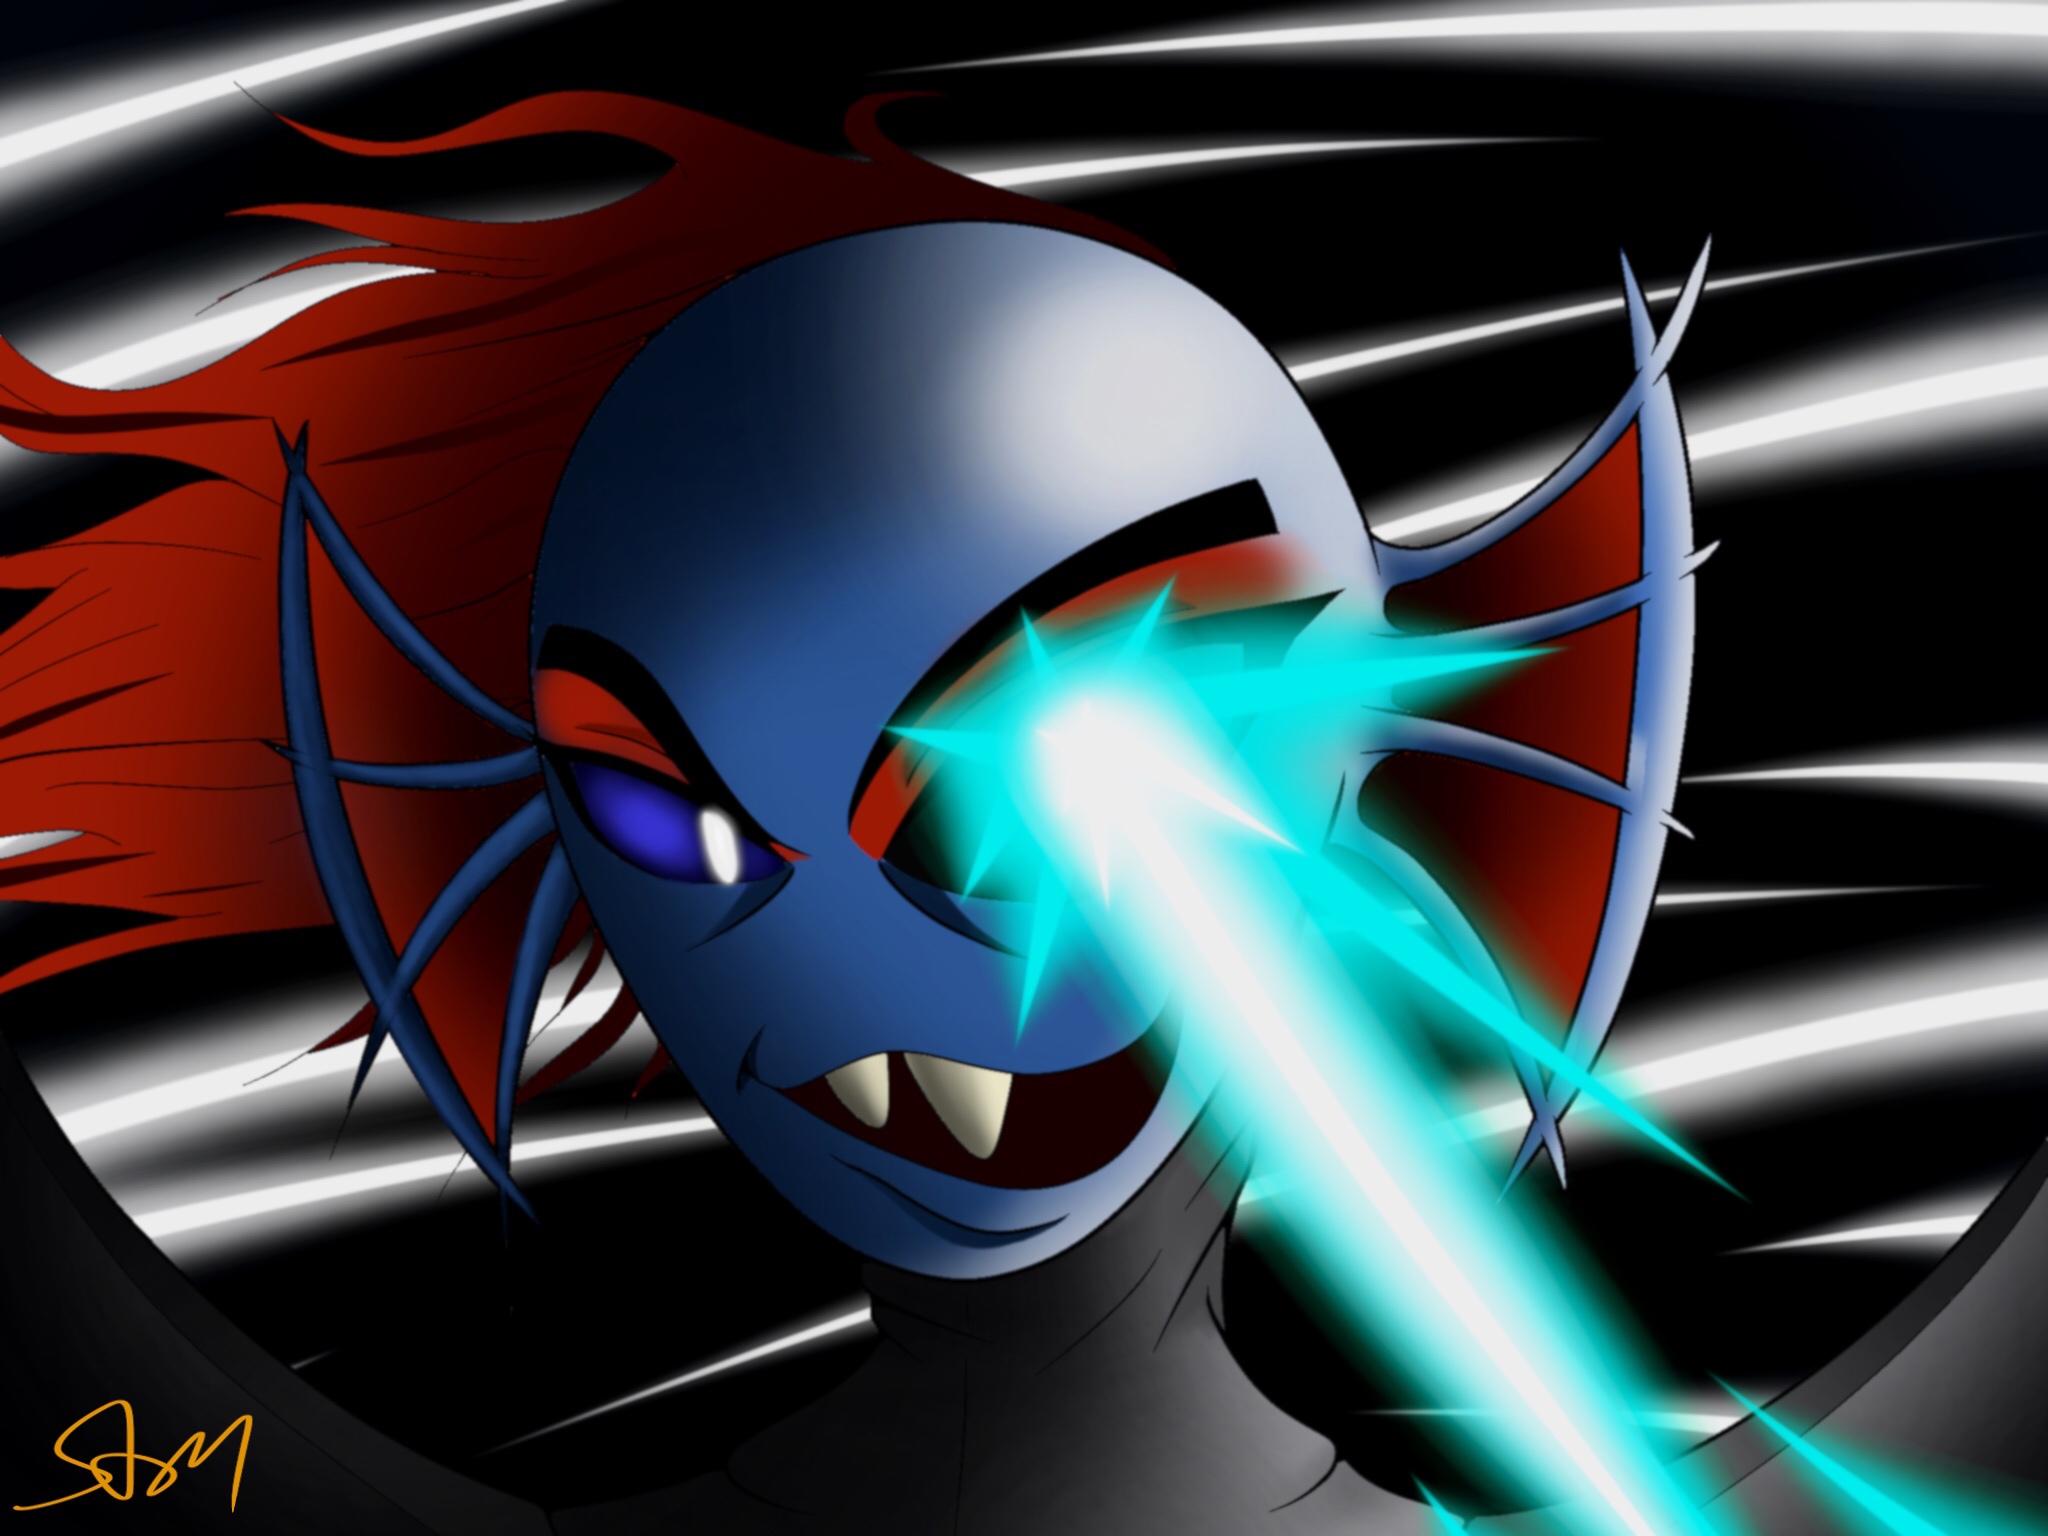 Undyne The Undying Art - Graphic Design , HD Wallpaper & Backgrounds